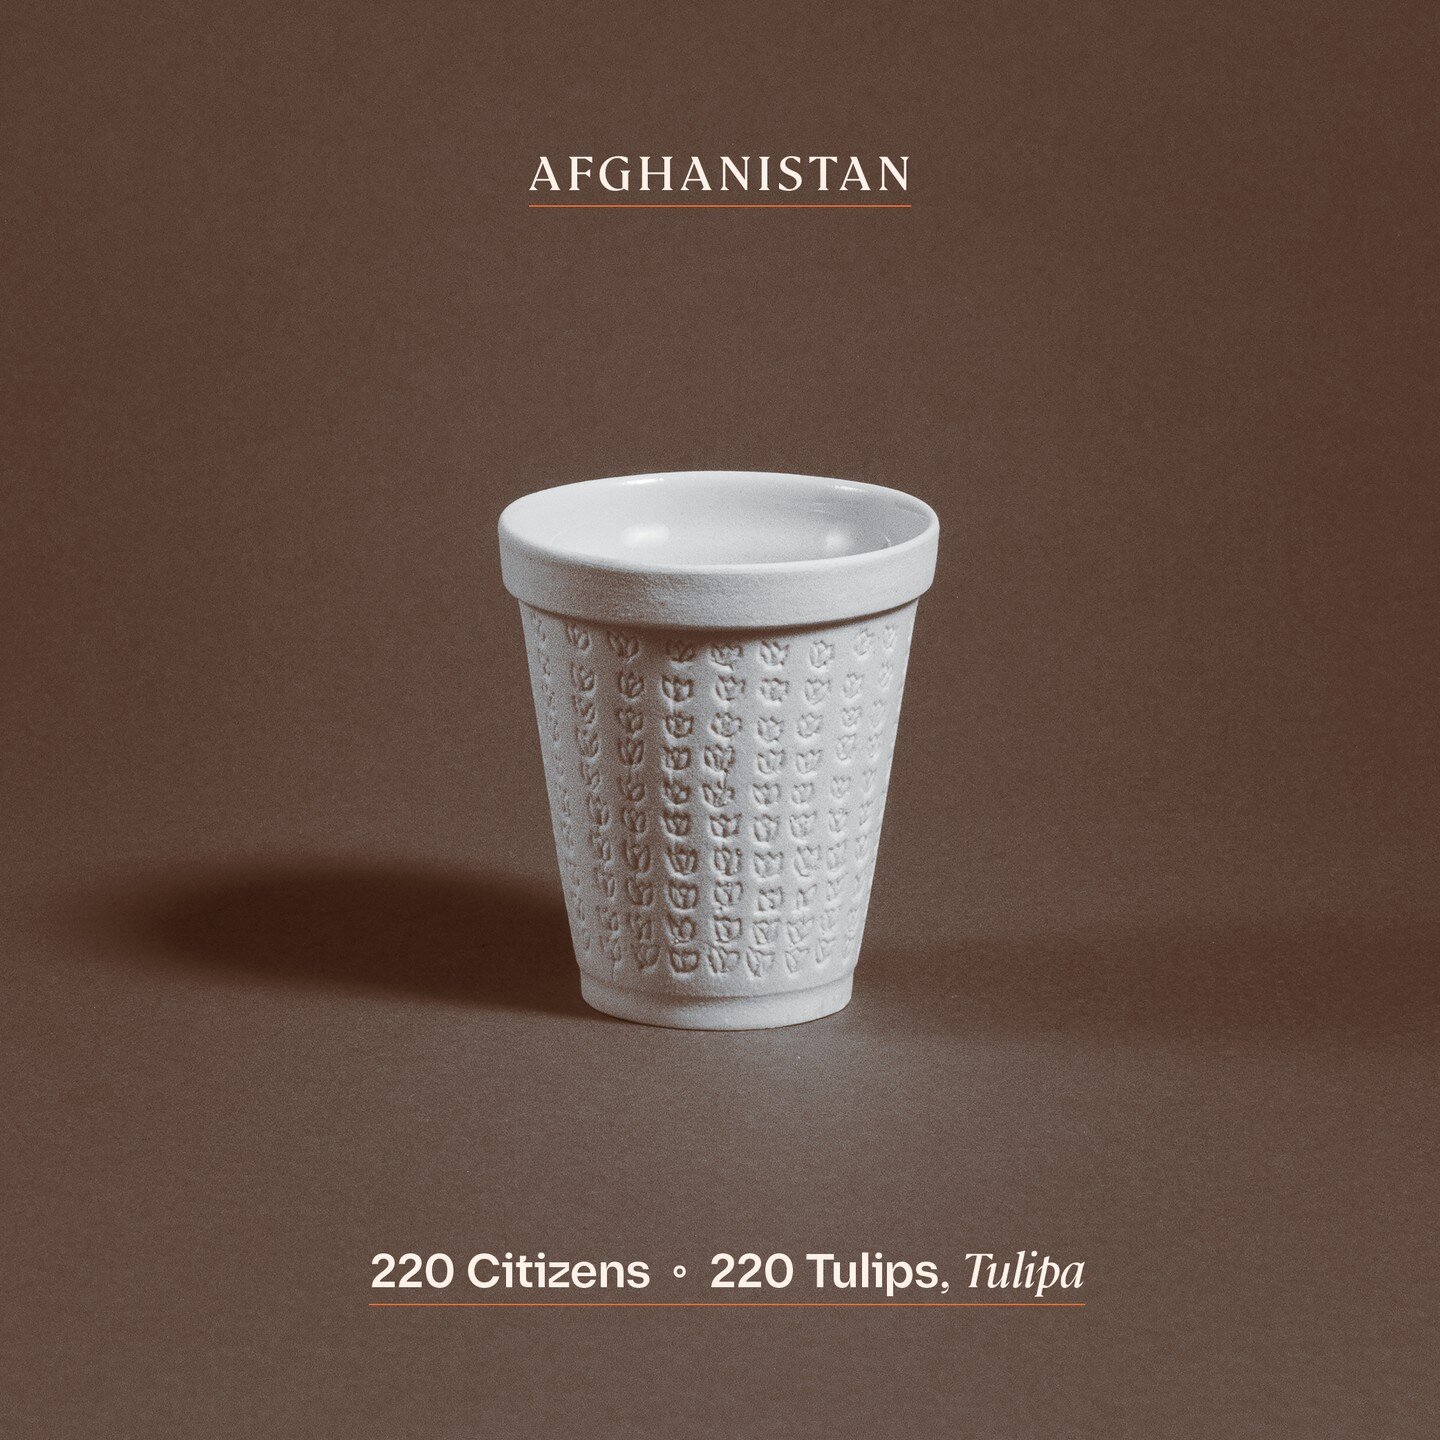 AFGHANISTAN

This week we imagine that one day Muhammad Rahim will have tea with his family upon his freedom from Guantanamo. This tea recipe is from &quot;Z&quot; who was a coordinator for the Afghan Peace Volunteers in Kabul. 

INGREDIENTS 
- Green